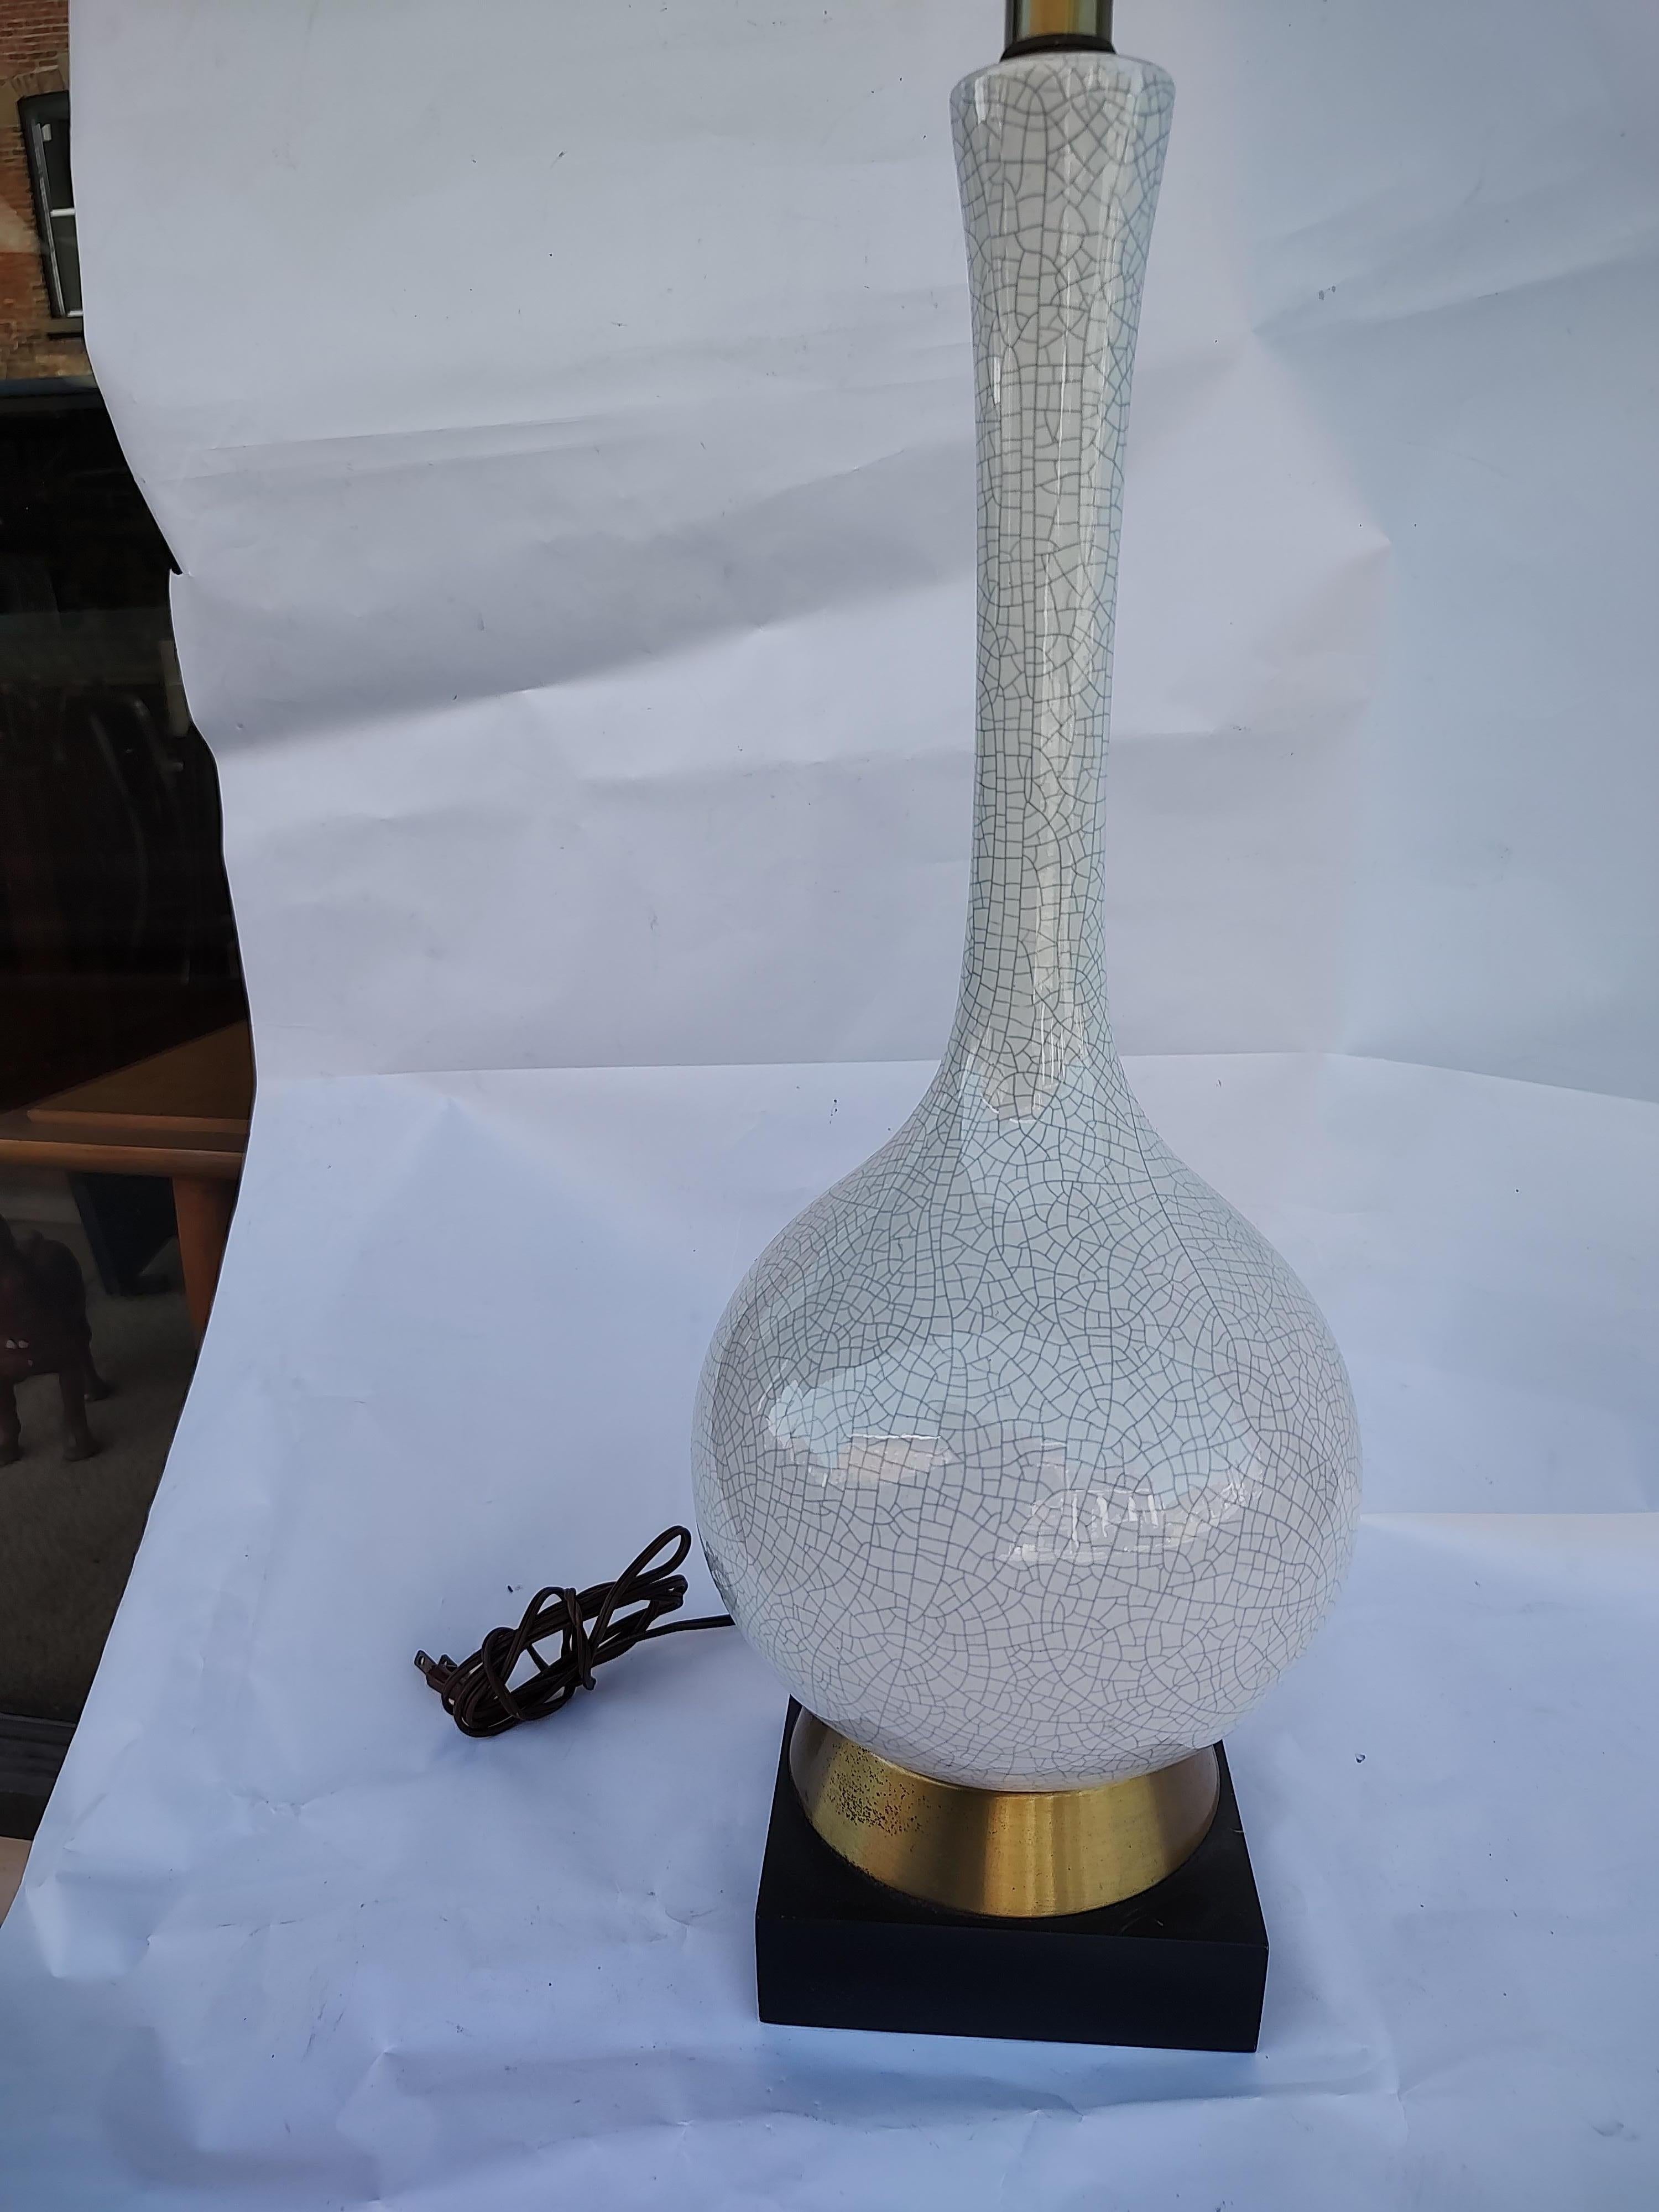 Pair of Mid Century Modern Bottle Shape Table Lamps with Crackle Glaze In Good Condition For Sale In Port Jervis, NY